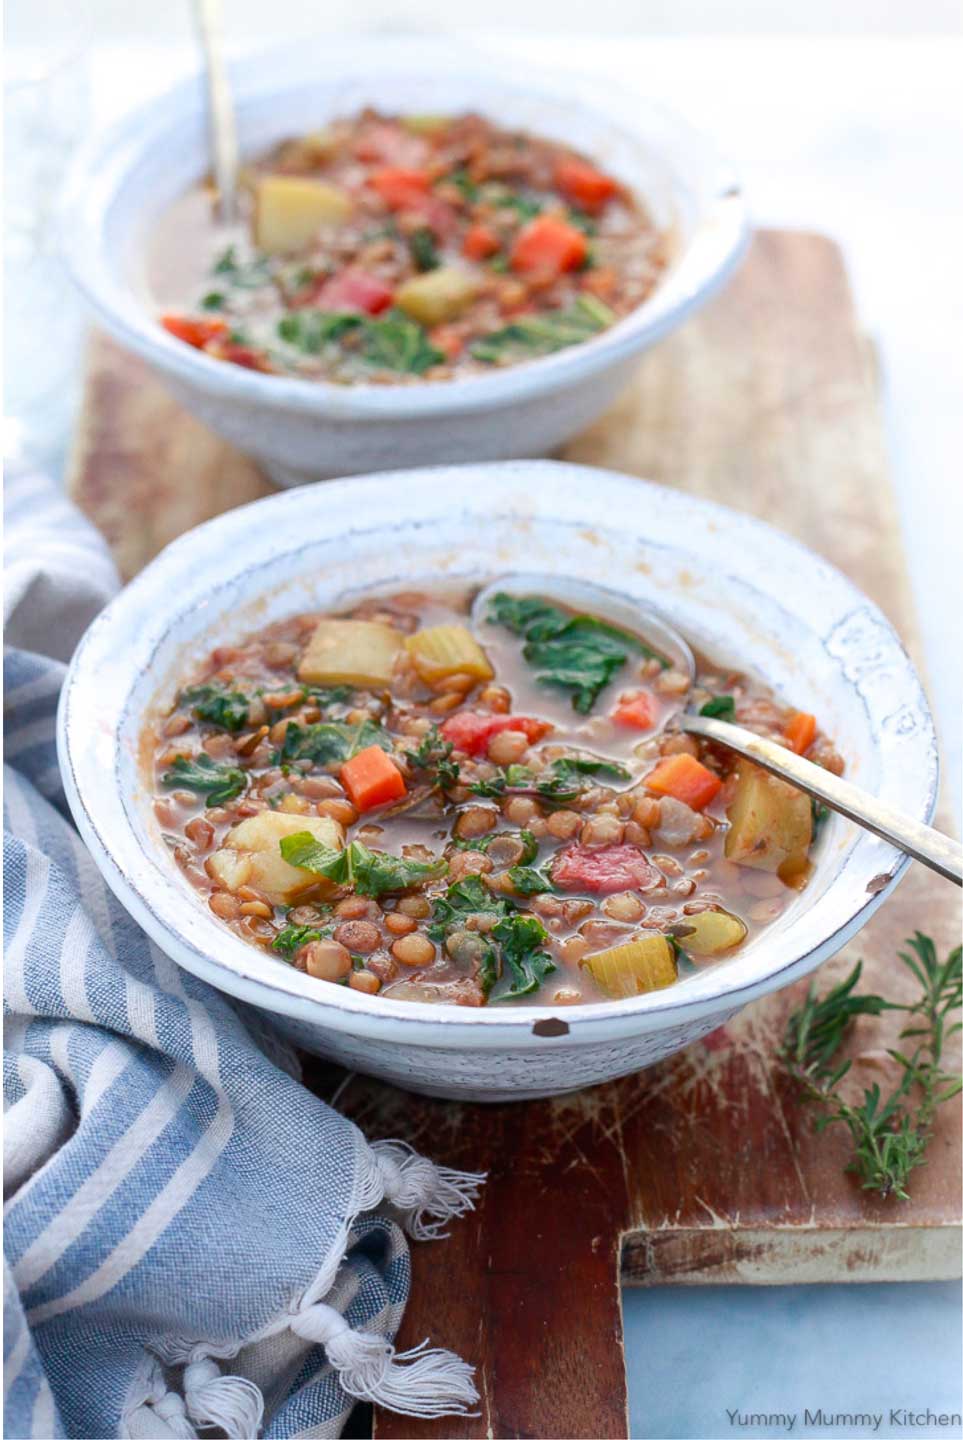 This vegan Instant Pot Lentil Soup from Marina at Yummy Mummy Kitchen is just one of more than 10 vegan soup recipes we’ve got lined up for you in this terrific list! And they’re all so easy, thanks to your electric pressure cooker! If you like easy, meatless meal ideas, you’ll love our list!